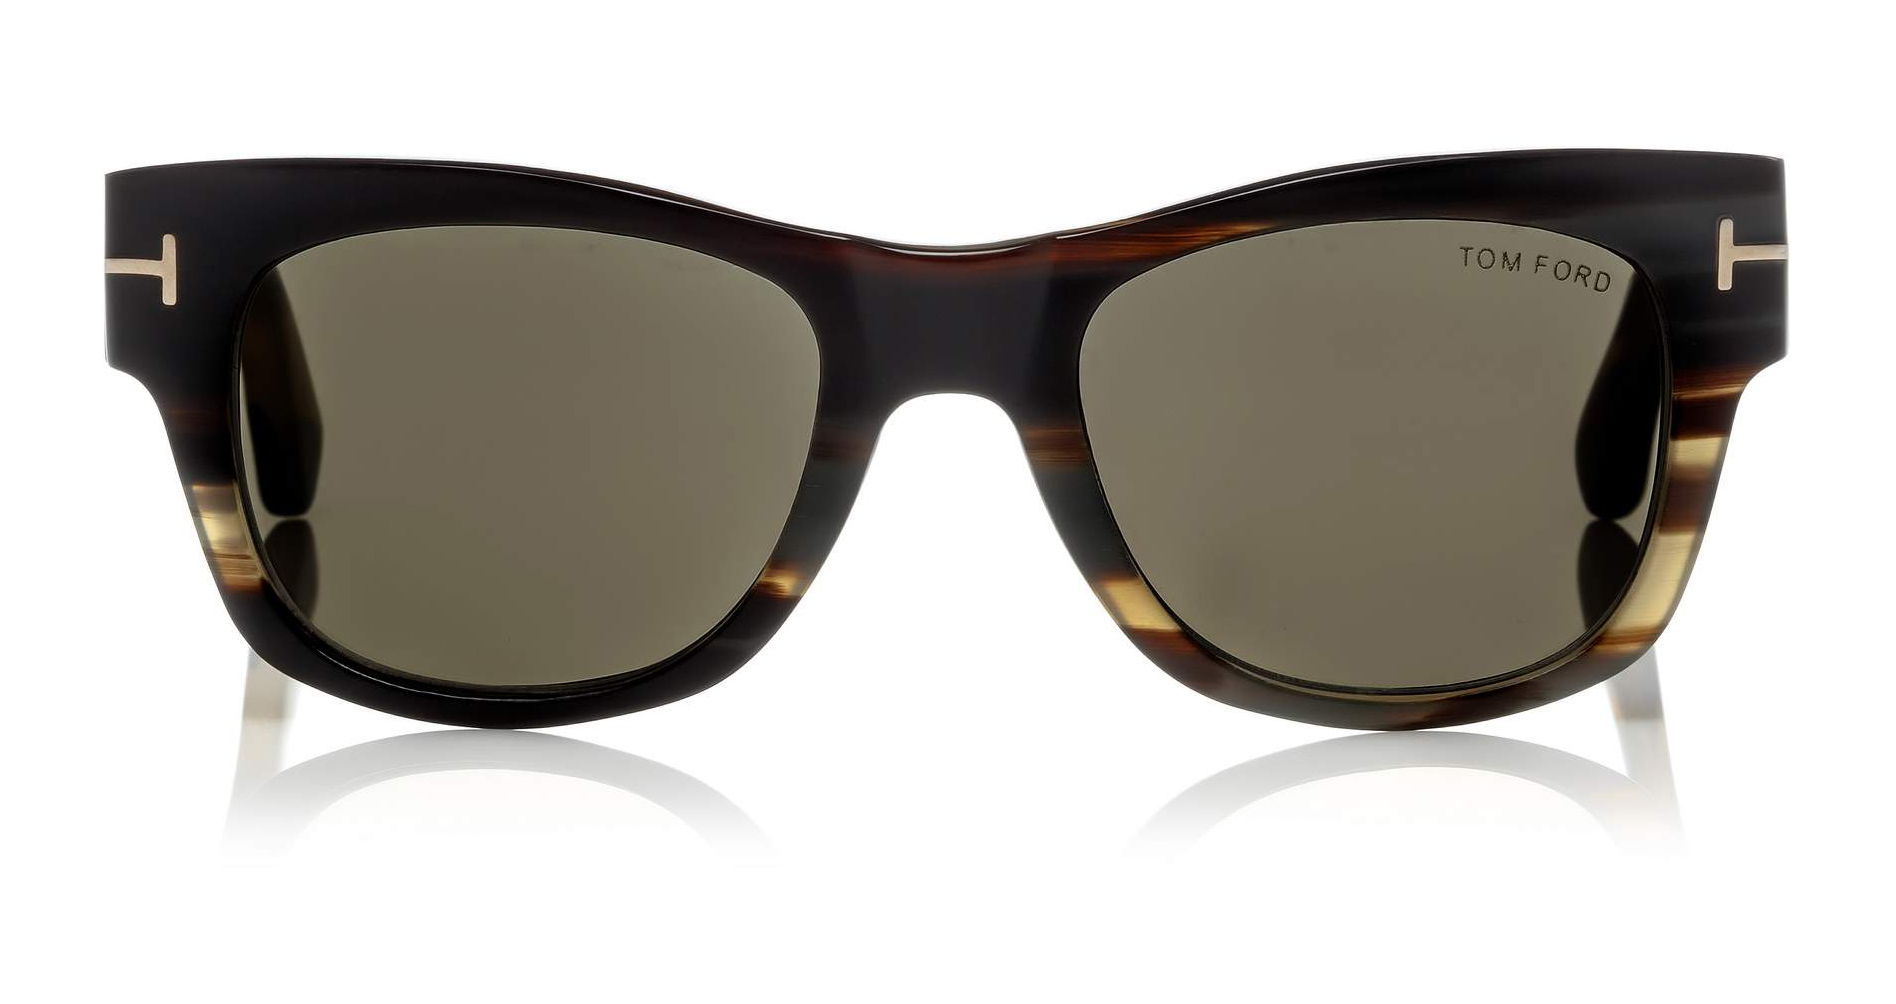 Tom Ford Private Collection - Designer Eyes